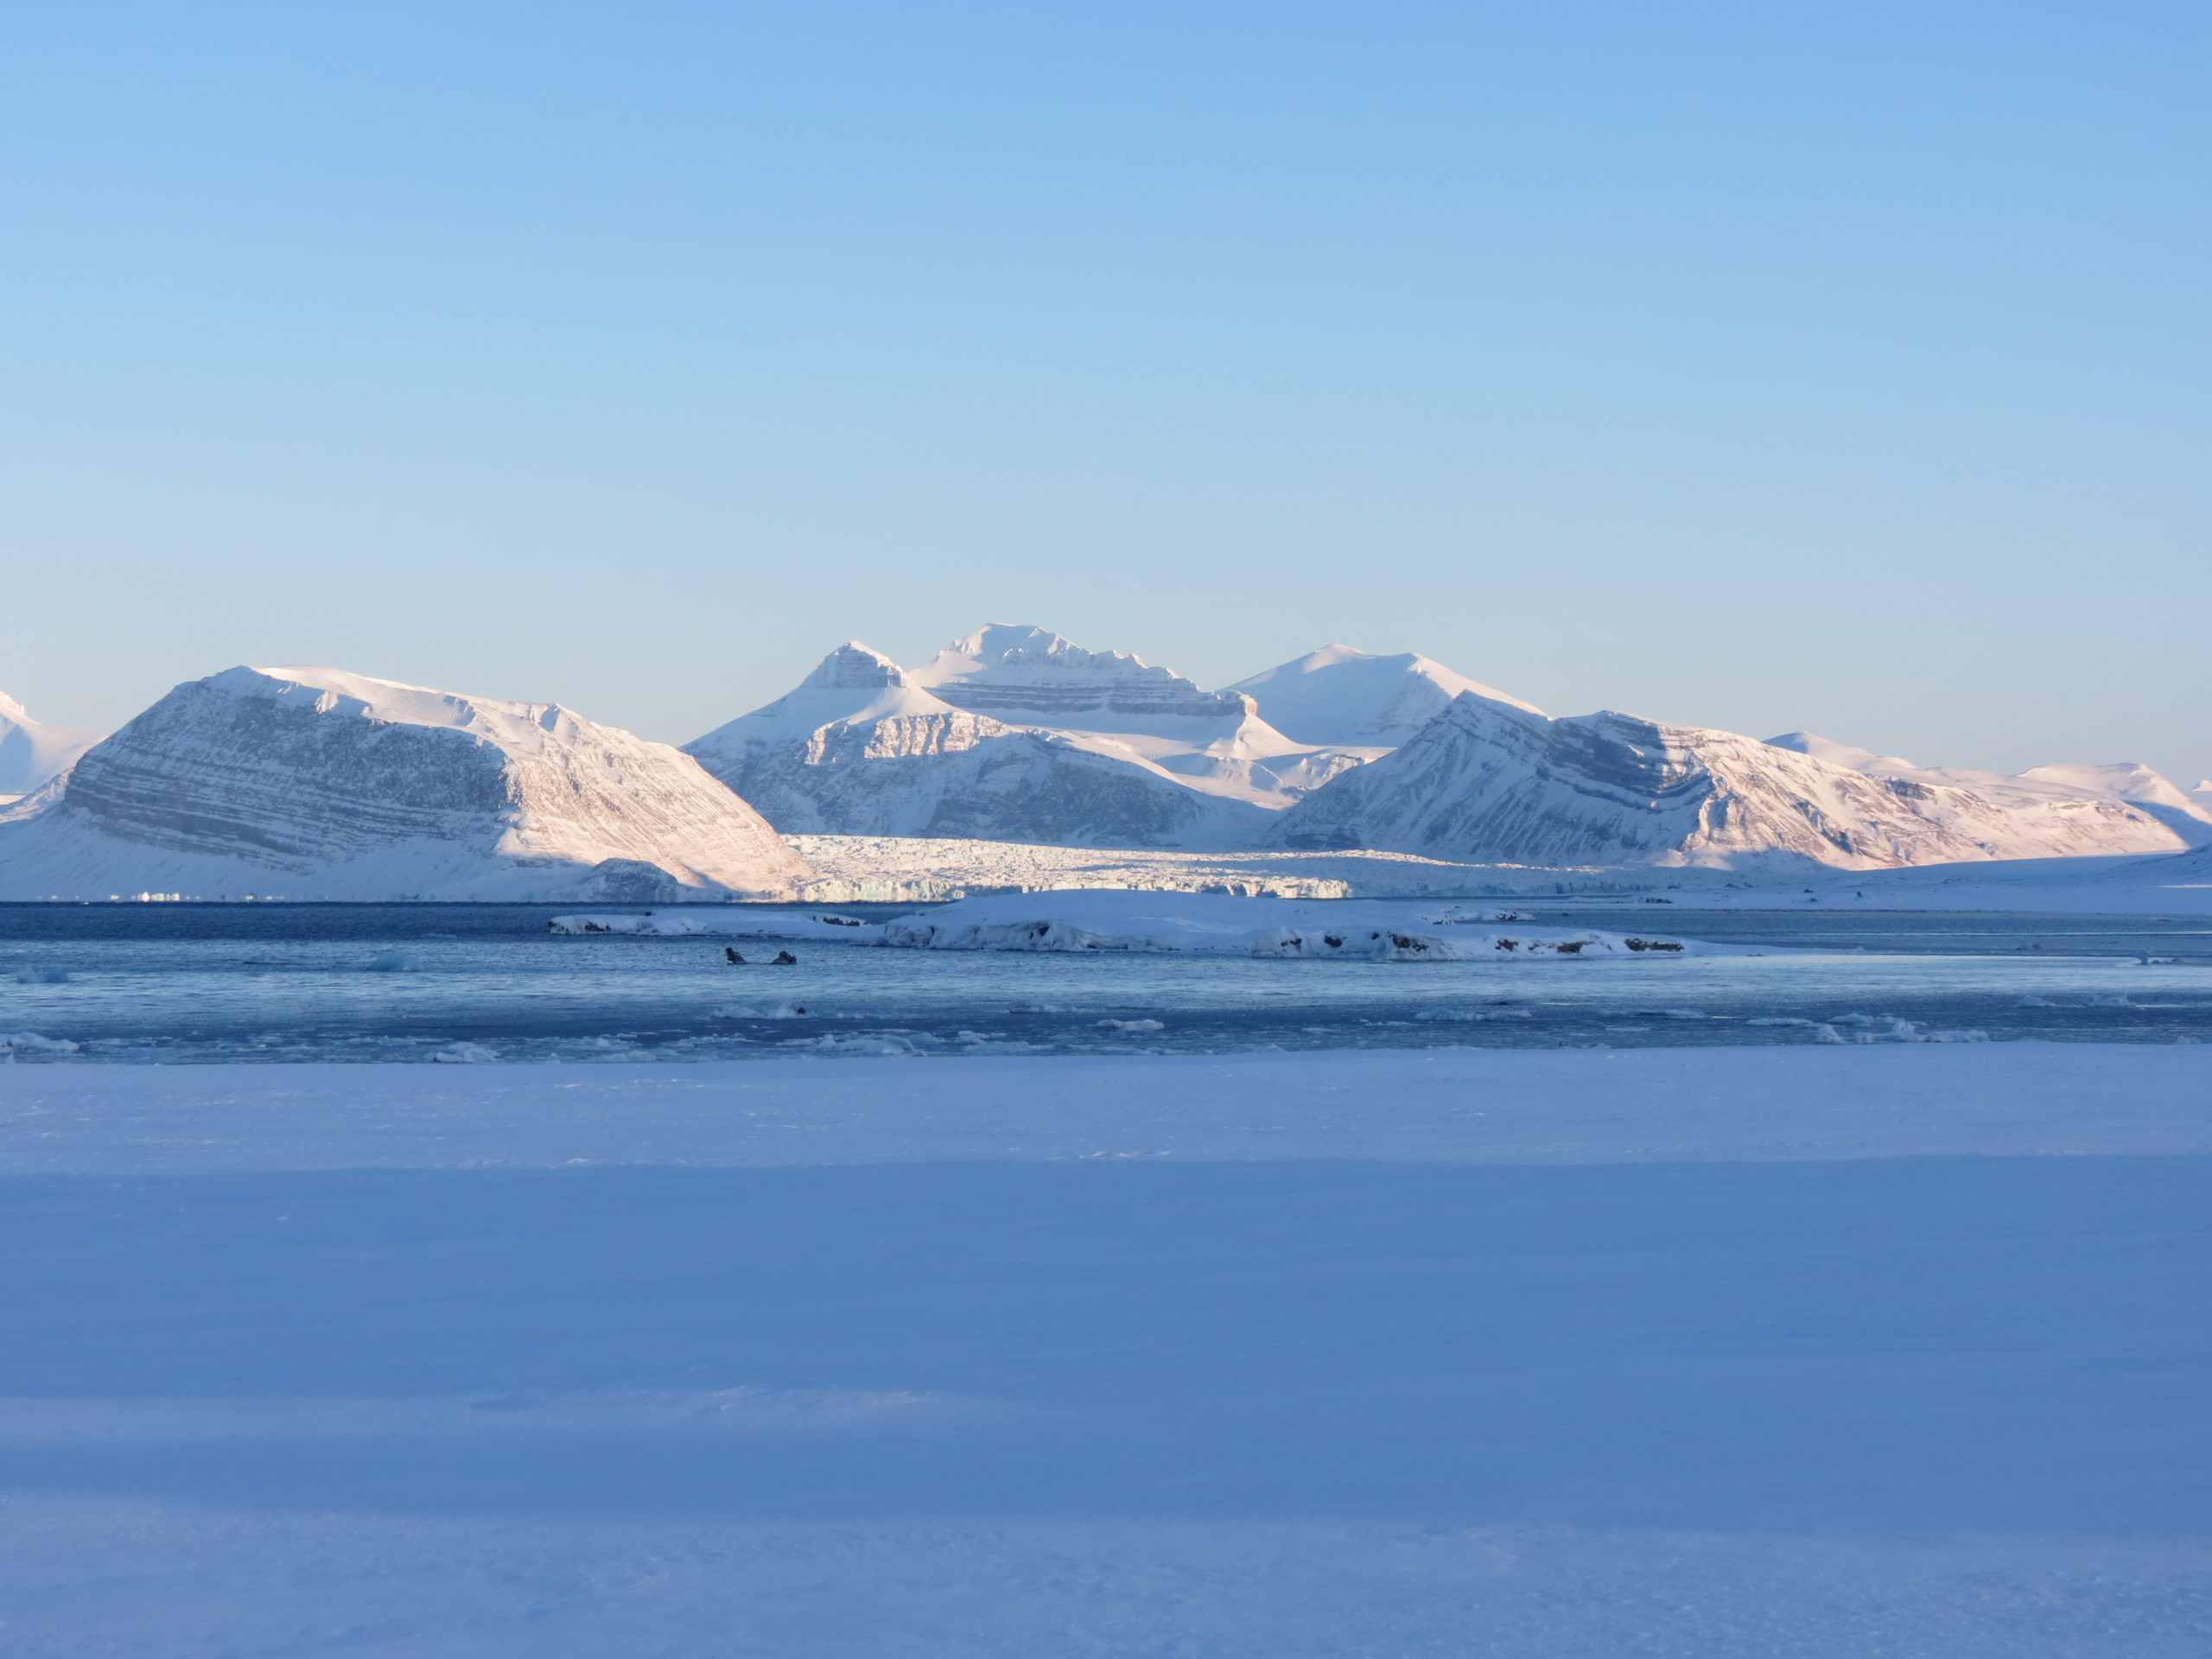 View of the mountains looking east from Ny-Ålesund